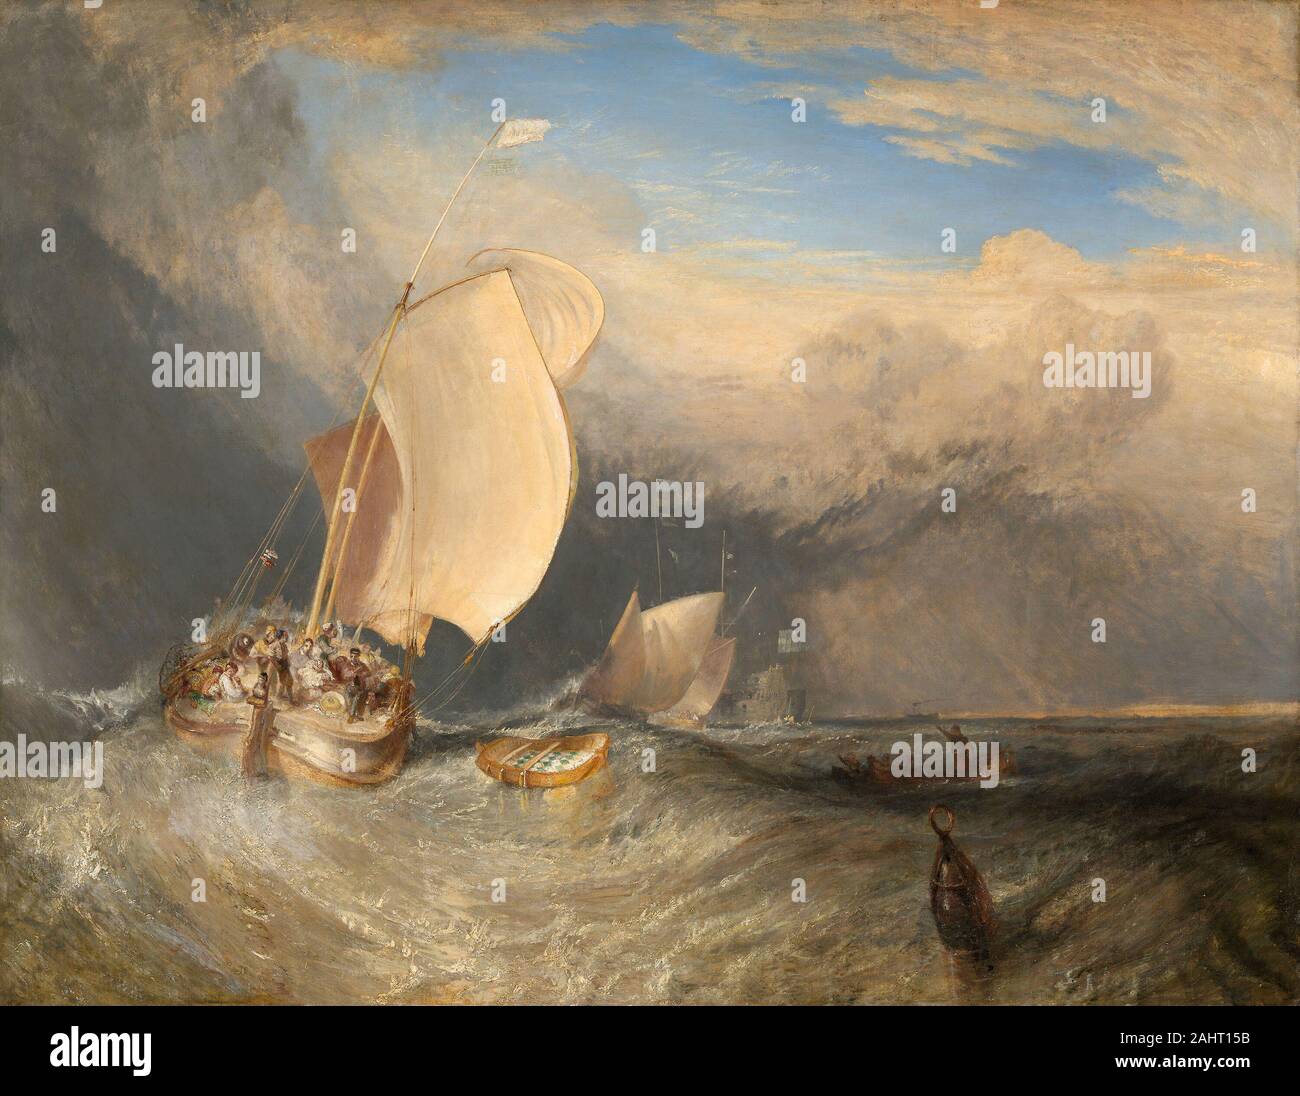 Joseph Mallord William Turner. Fishing Boats with Hucksters Bargaining for Fish. 1832–1842. England. Oil on canvas In Fishing Boats with Hucksters Bargaining for Fish, Joseph Mallord William Turner translated his enduring preoccupation with the sea into a dramatic vision. The subject itself and the painting’s low horizon line derive directly from seventeenth-century Dutch sea painting. But where the boats in the seascapes of the period are almost reconstructible in their exactness, Turner’s minimal and more impressionistic depiction of vessels is secondary to the drama of roiling seas, billowi Stock Photo